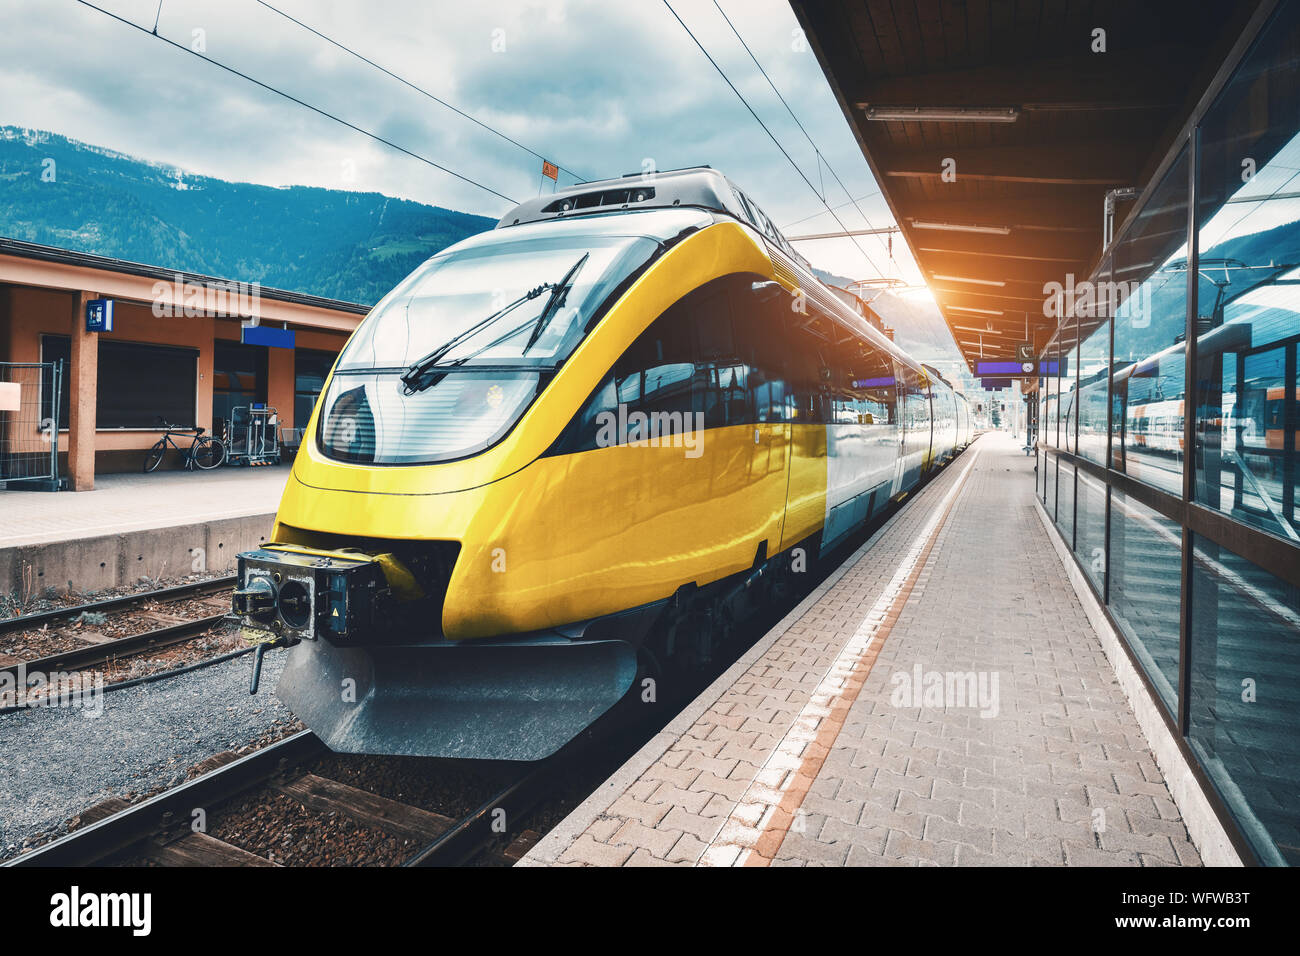 Beautiful high speed train on the railway station in mountains Stock Photo